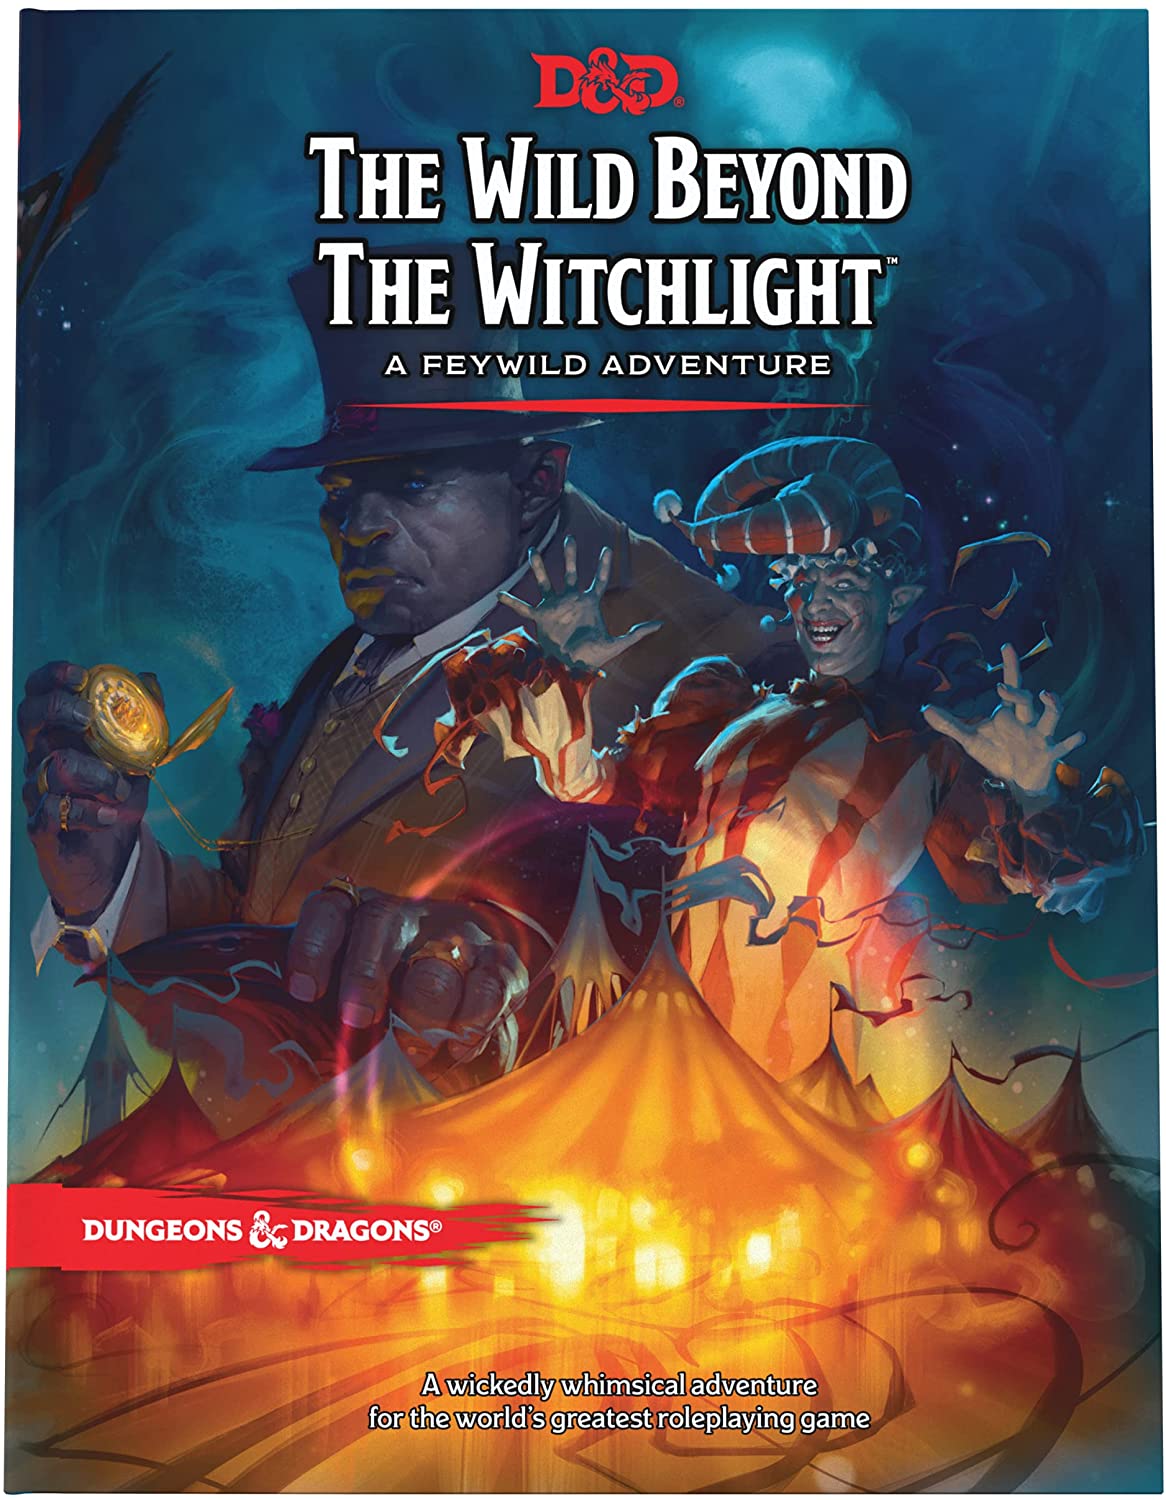 The Wild Beyond The Wichlight | D20 Games